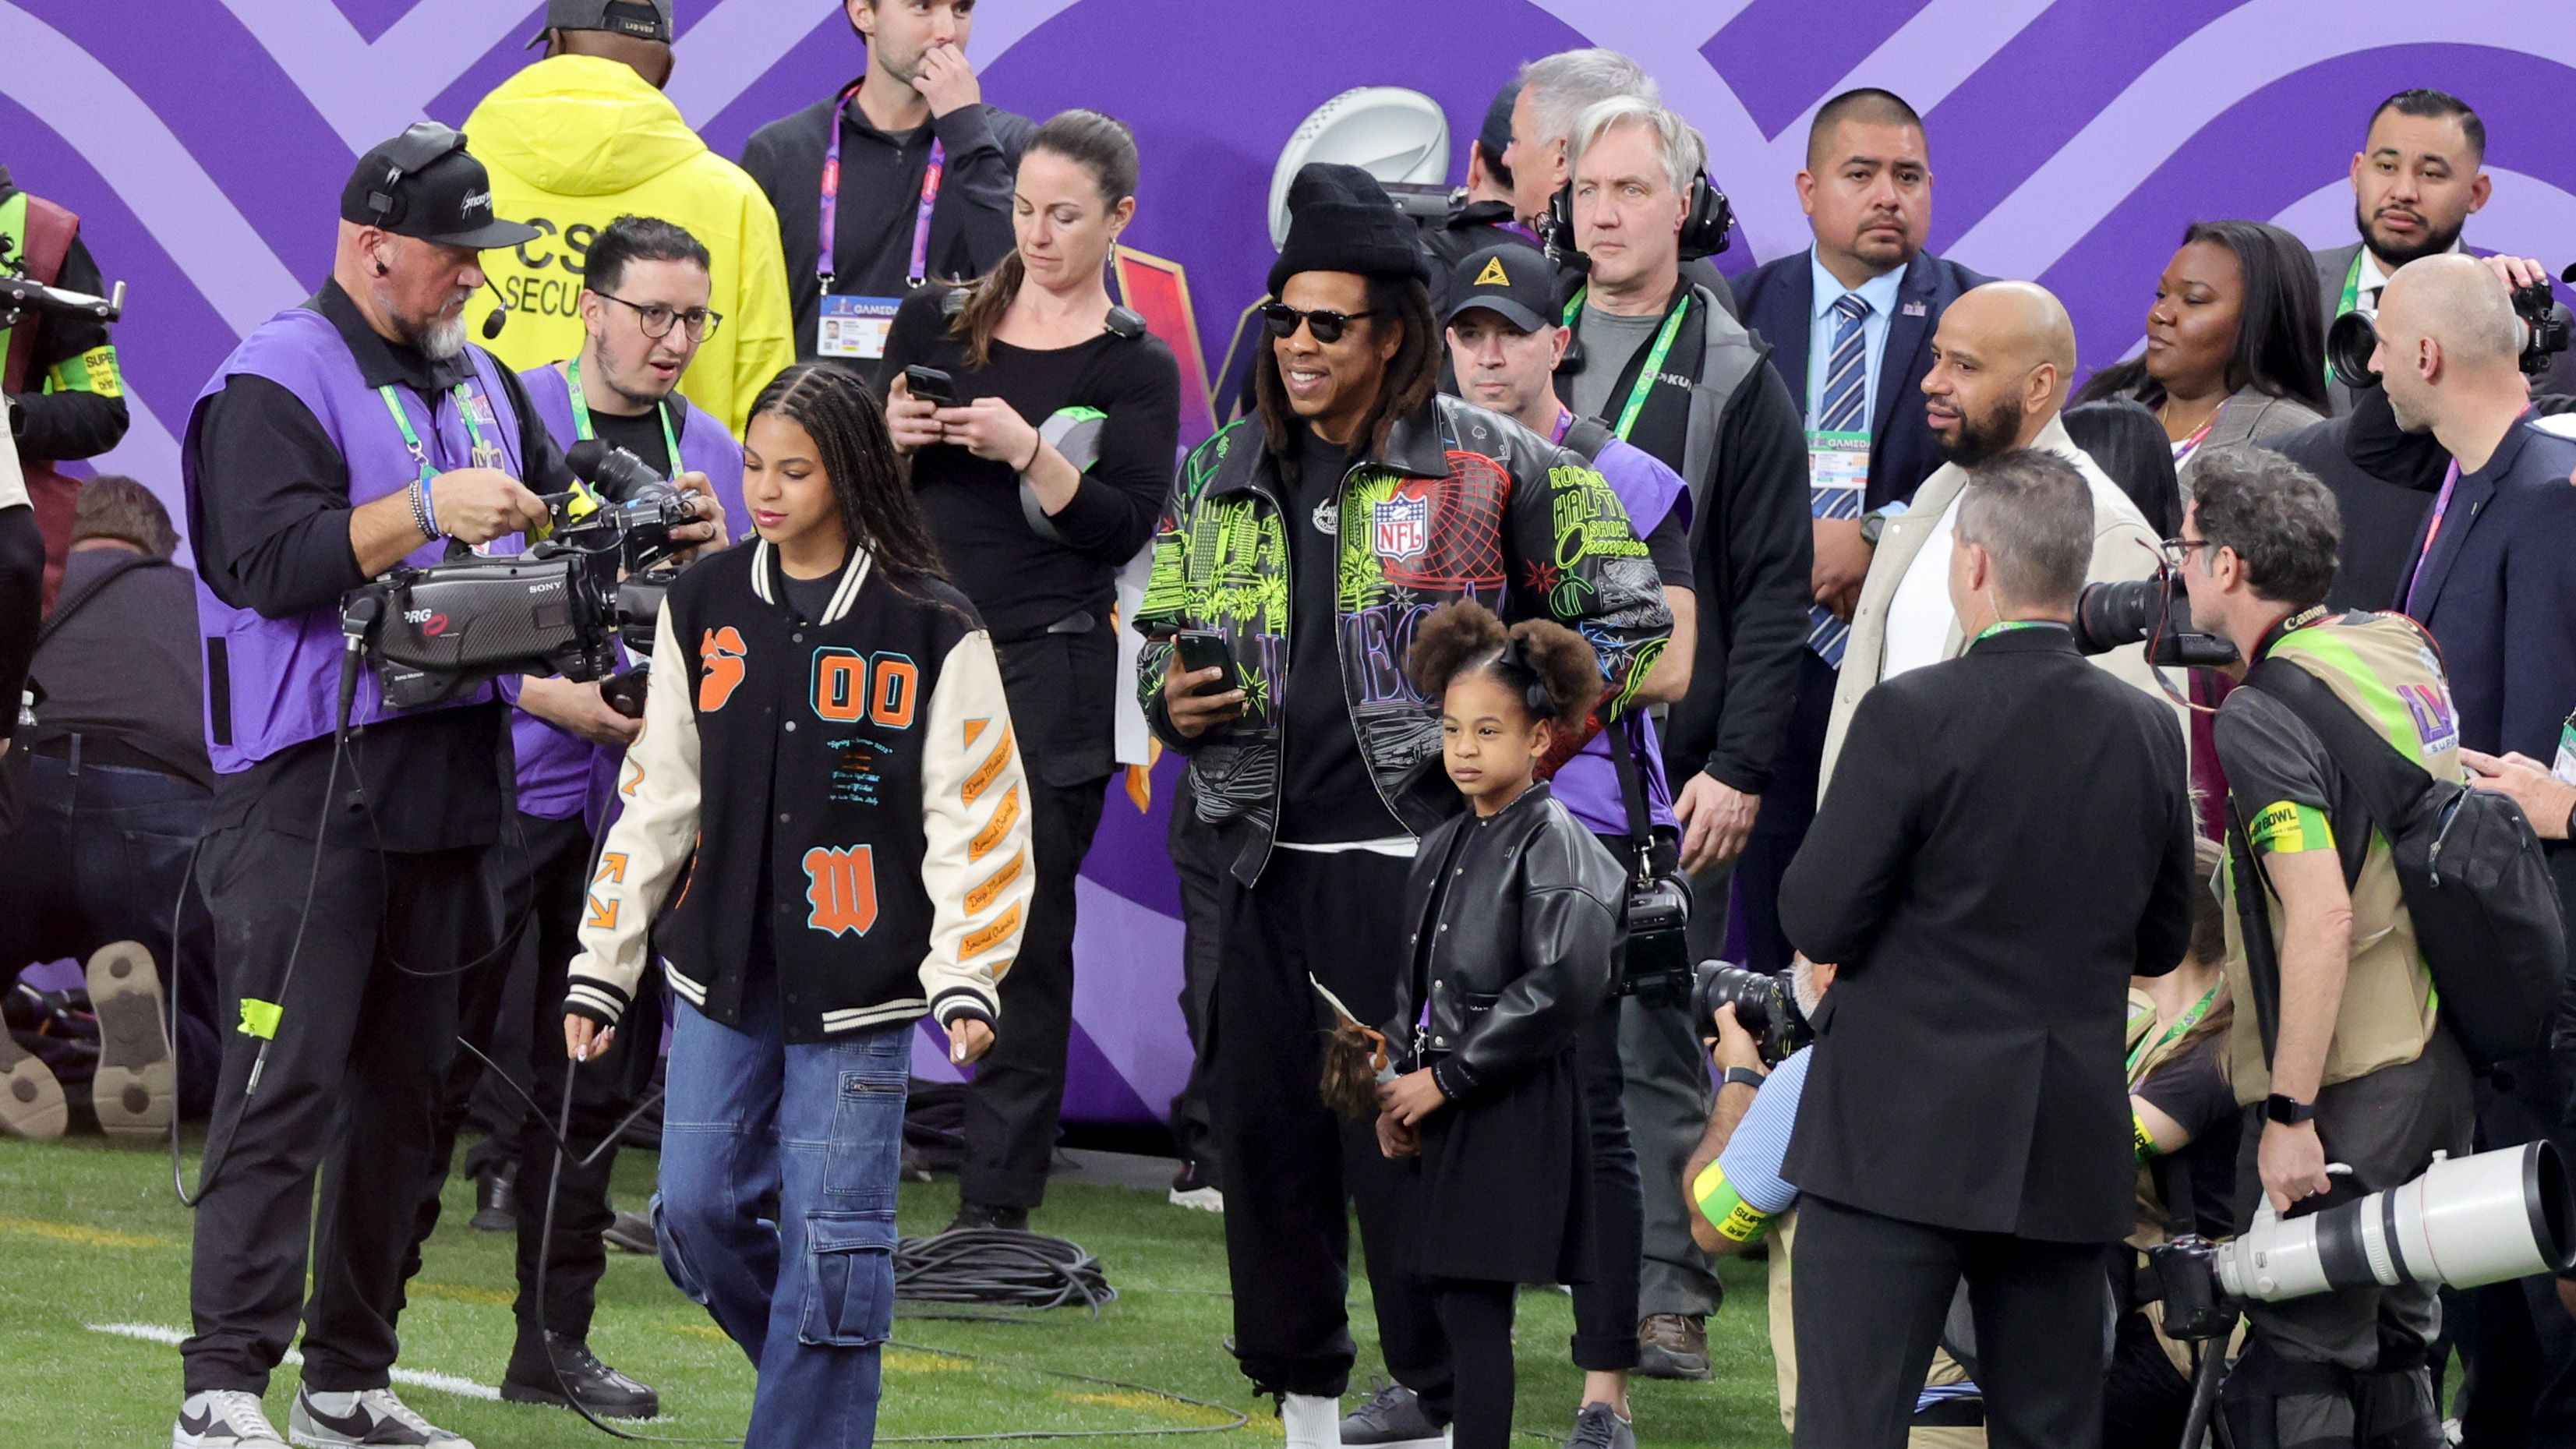 Jay-Z, Blue Ivy turn Super Bowl into cute daddy-daughter outing